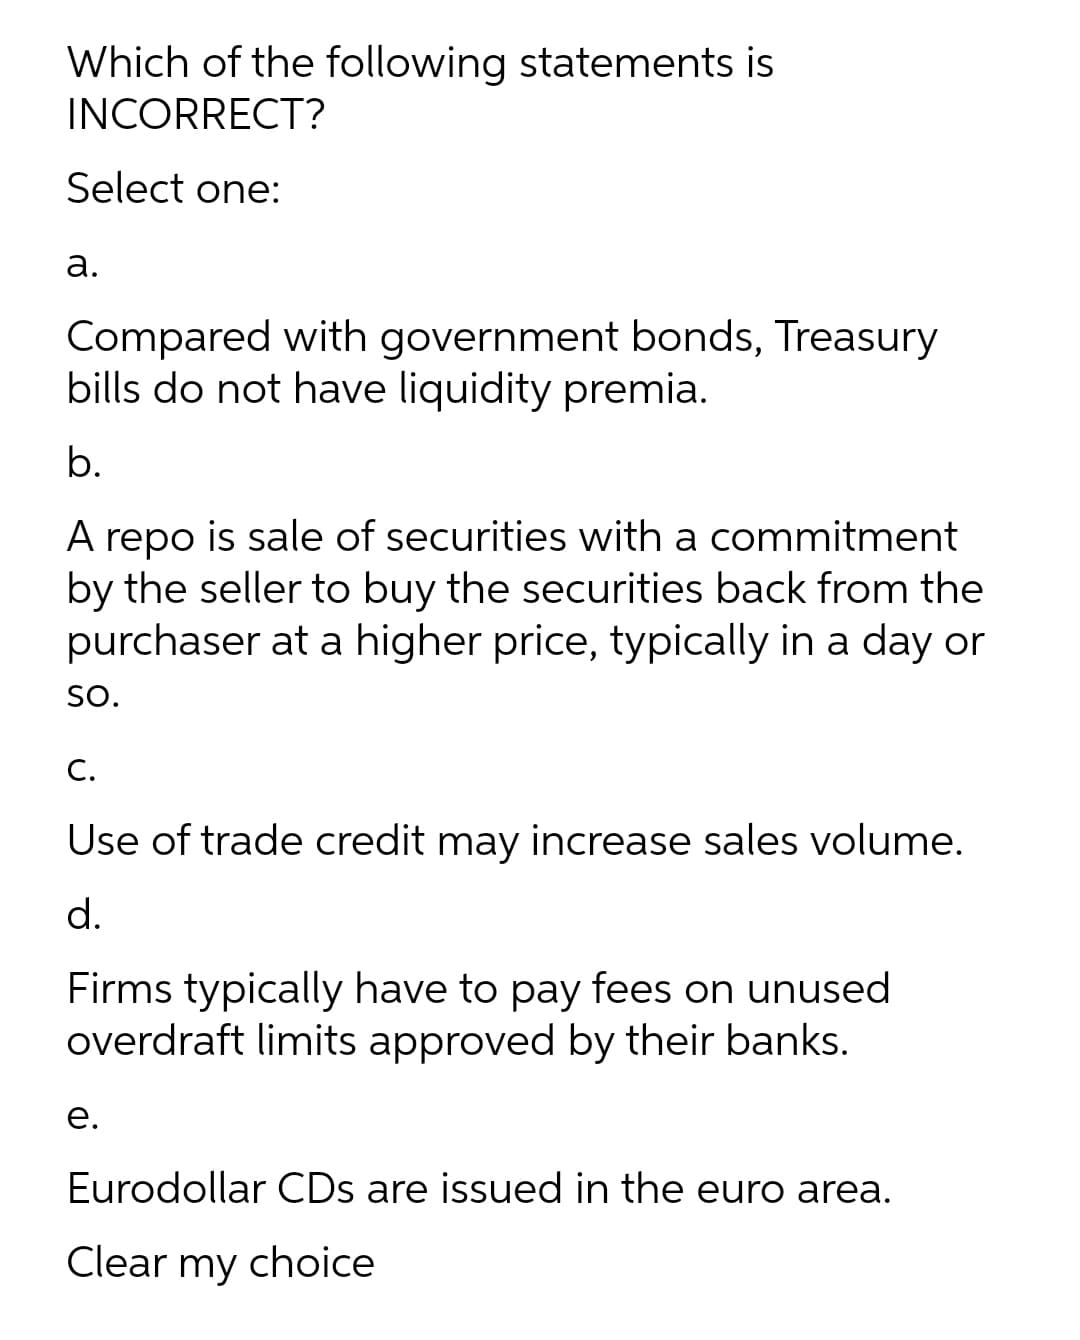 Which of the following statements is
INCORRECT?
Select one:
а.
Compared with government bonds, Treasury
bills do not have liquidity premia.
b.
A repo is sale of securities with a commitment
by the seller to buy the securities back from the
purchaser at a higher price, typically in a day or
SO.
C.
Use of trade credit may increase sales volume.
d.
Firms typically have to pay fees on unused
overdraft limits approved by their banks.
е.
Eurodollar CDs are issued in the euro area.
Clear my choice
